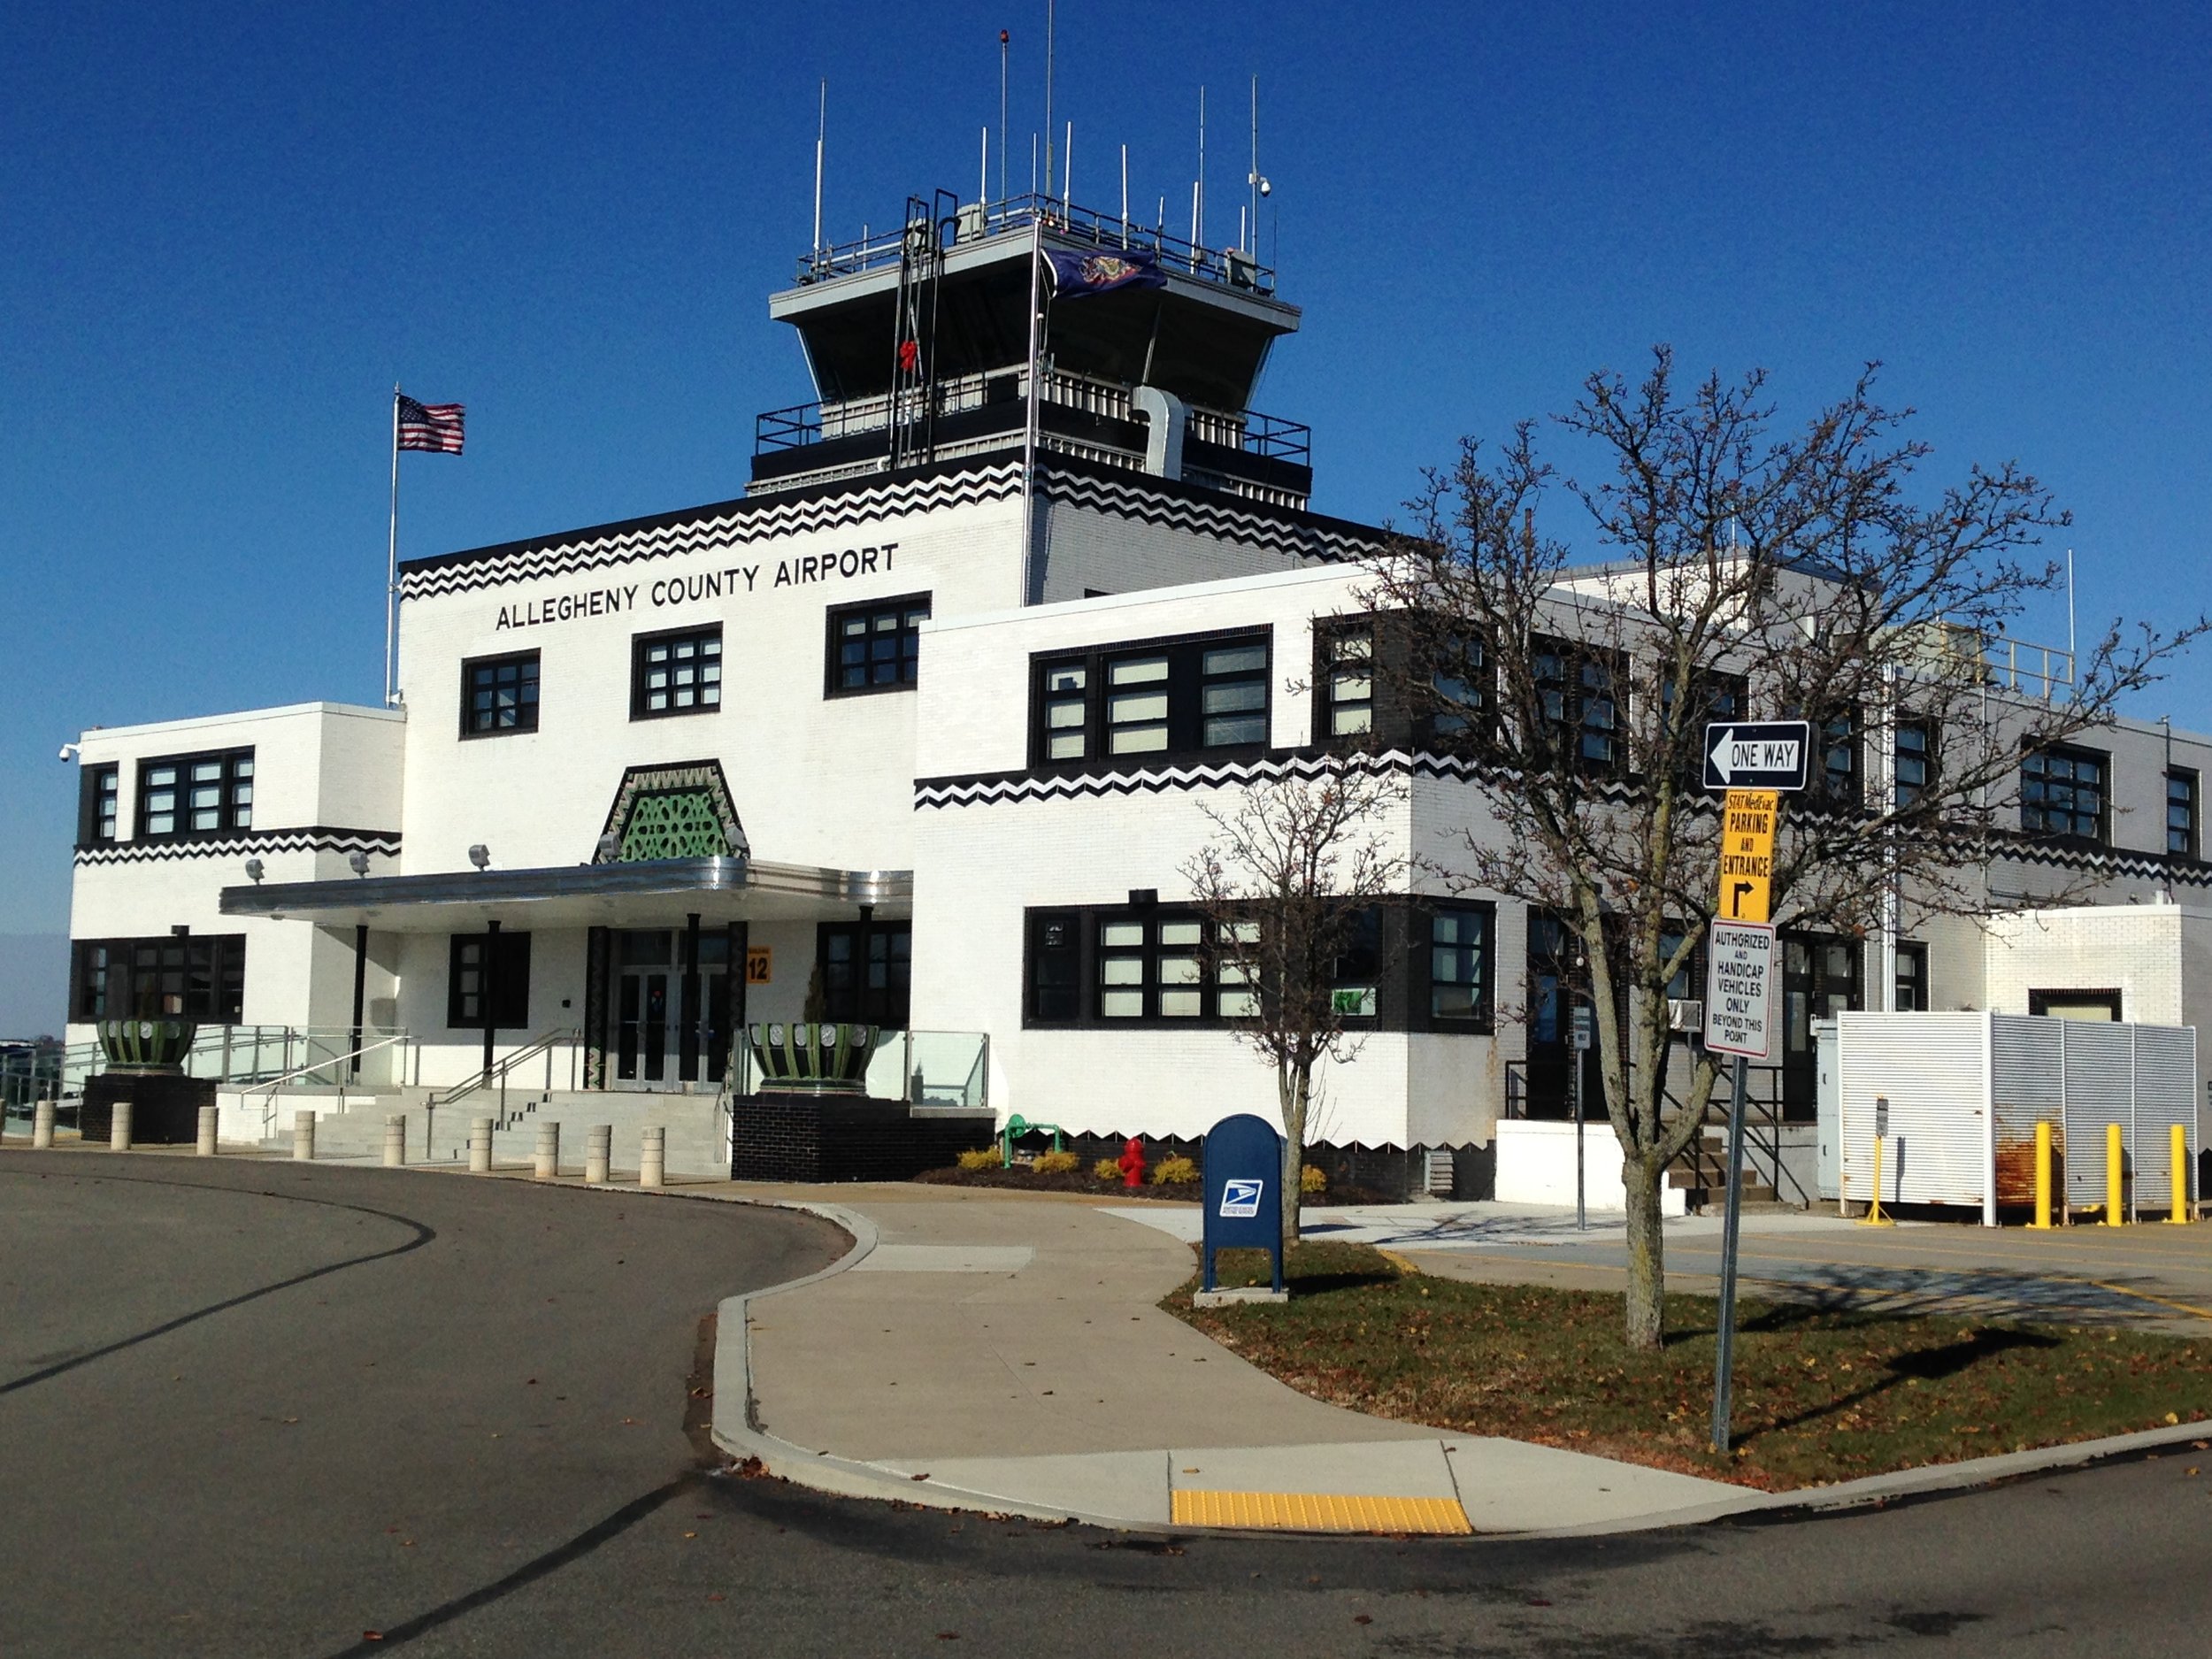  Historic main terminal building at Allegheny County Airport 